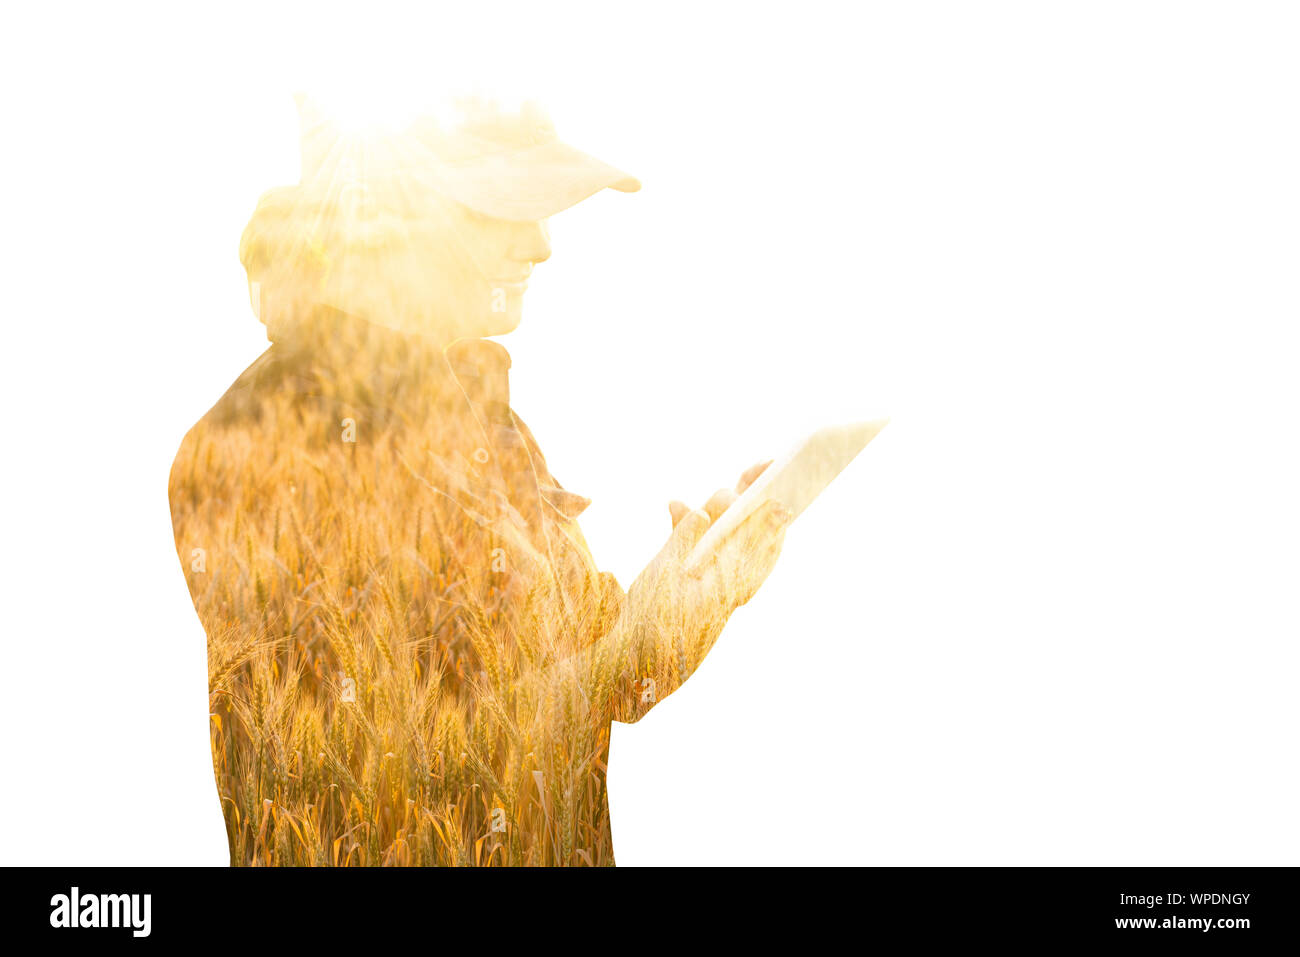 Woman farmer with tablet. Double exposure with wheat field. Smart farming and digital agriculture concept. Stock Photo